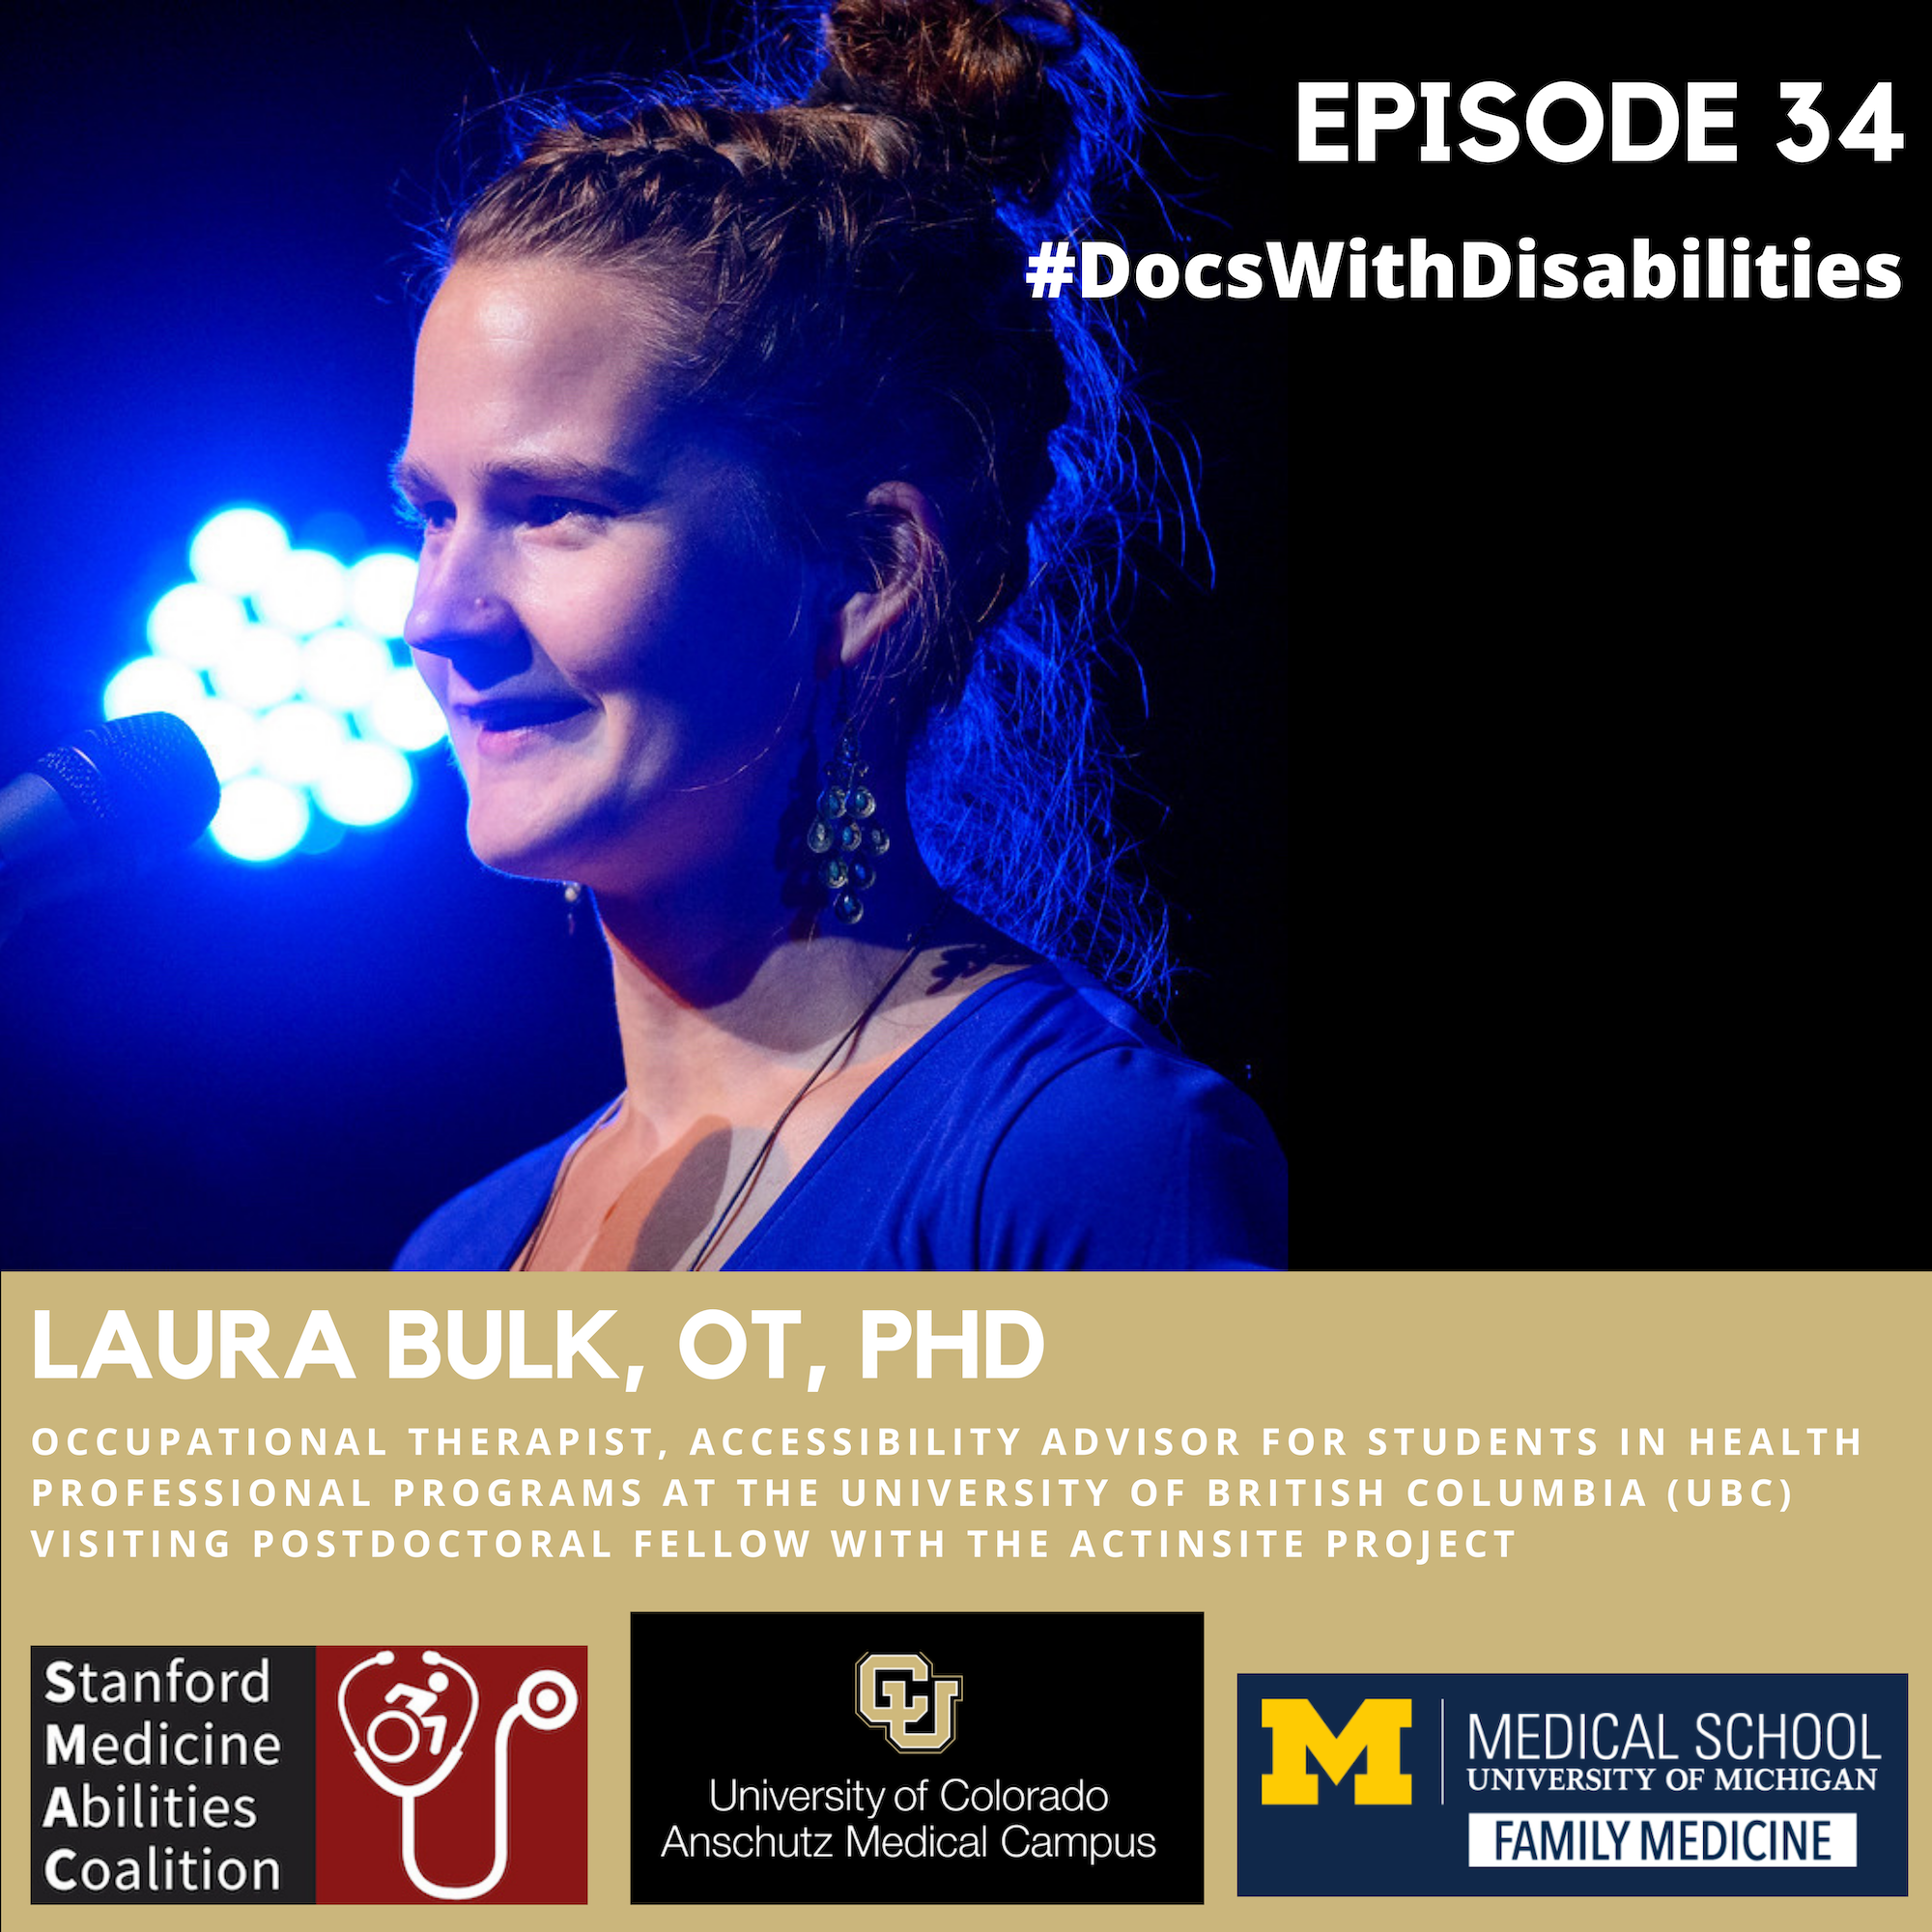 Docs With Disabilities Podcast Episode 34: Laura Bulk, OT, PhD, occupational therapist, accessibility advisor for students in health professional programs at the university of british columbia. visiting postdoctoral fellow with the actinsite project